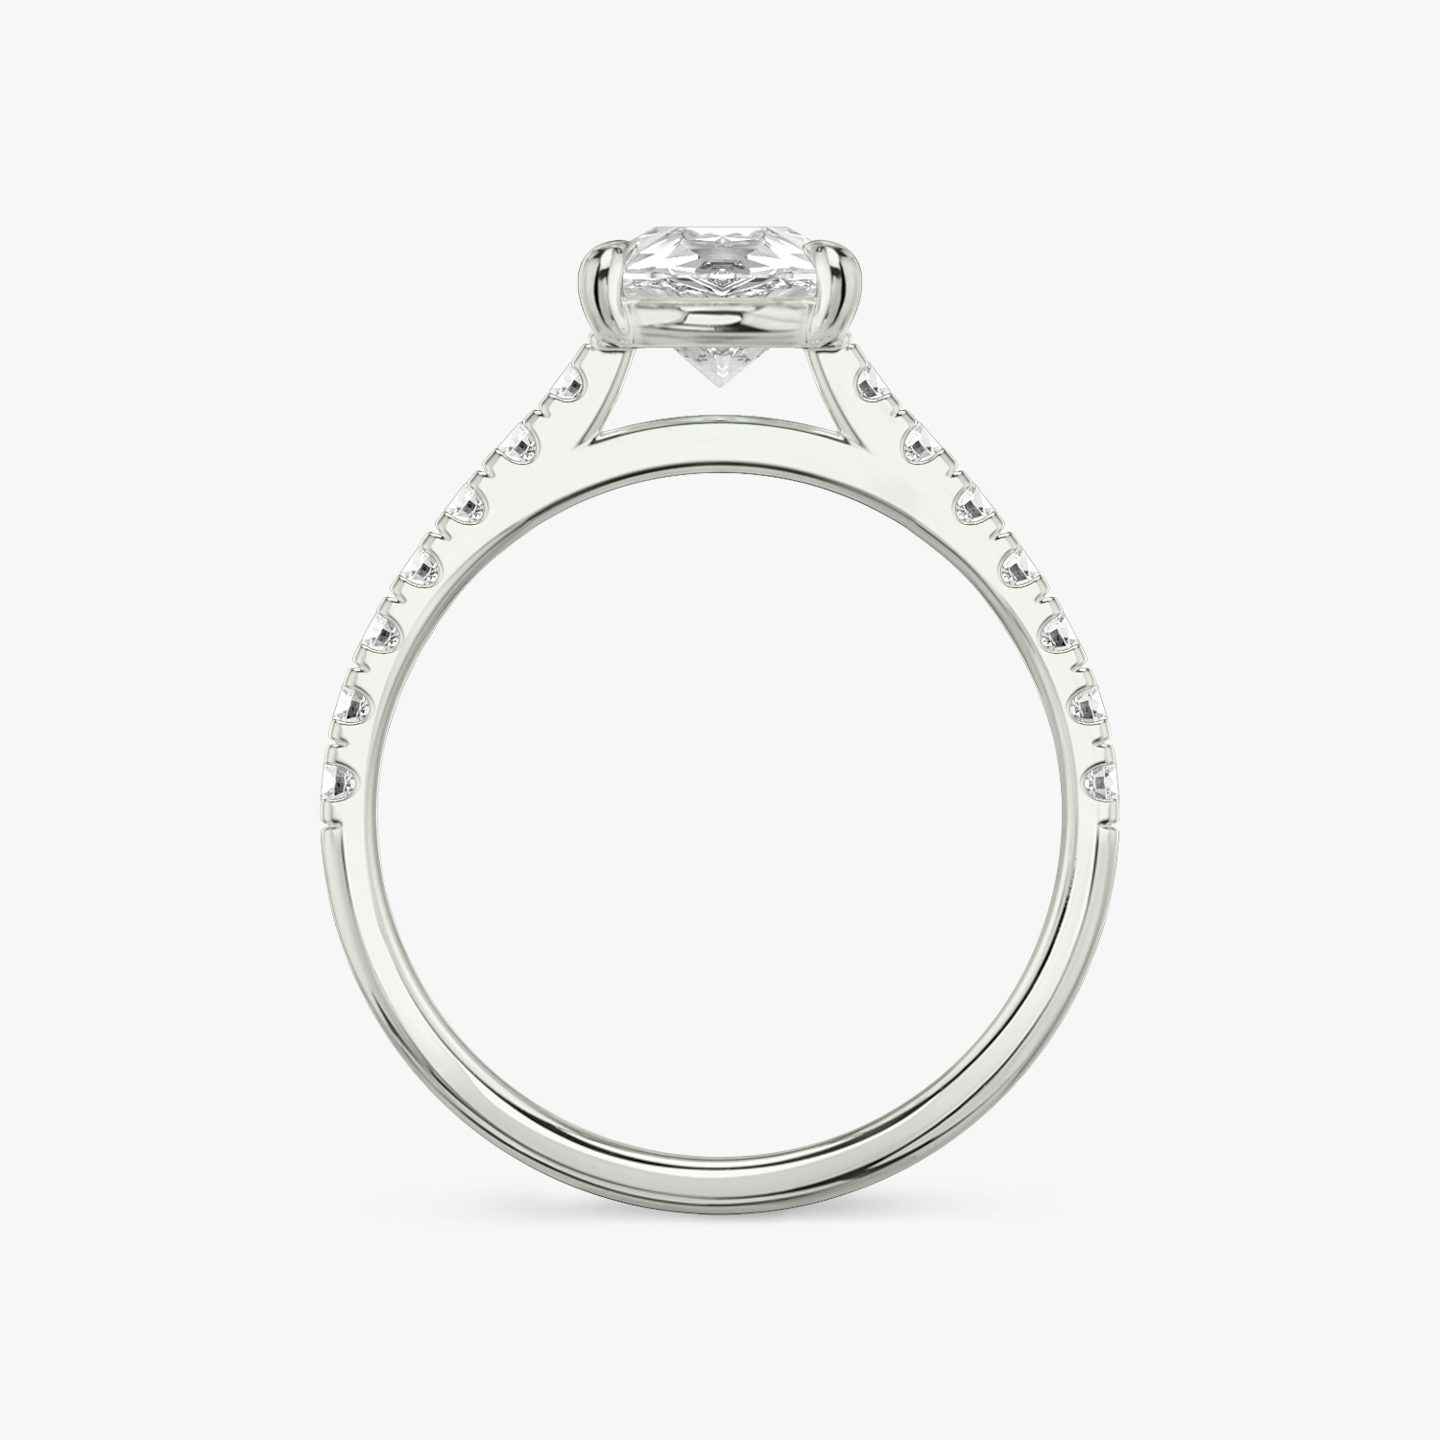 The Cathedral | pear | platinum | bandAccent: pave | diamondOrientation: vertical | caratWeight: other